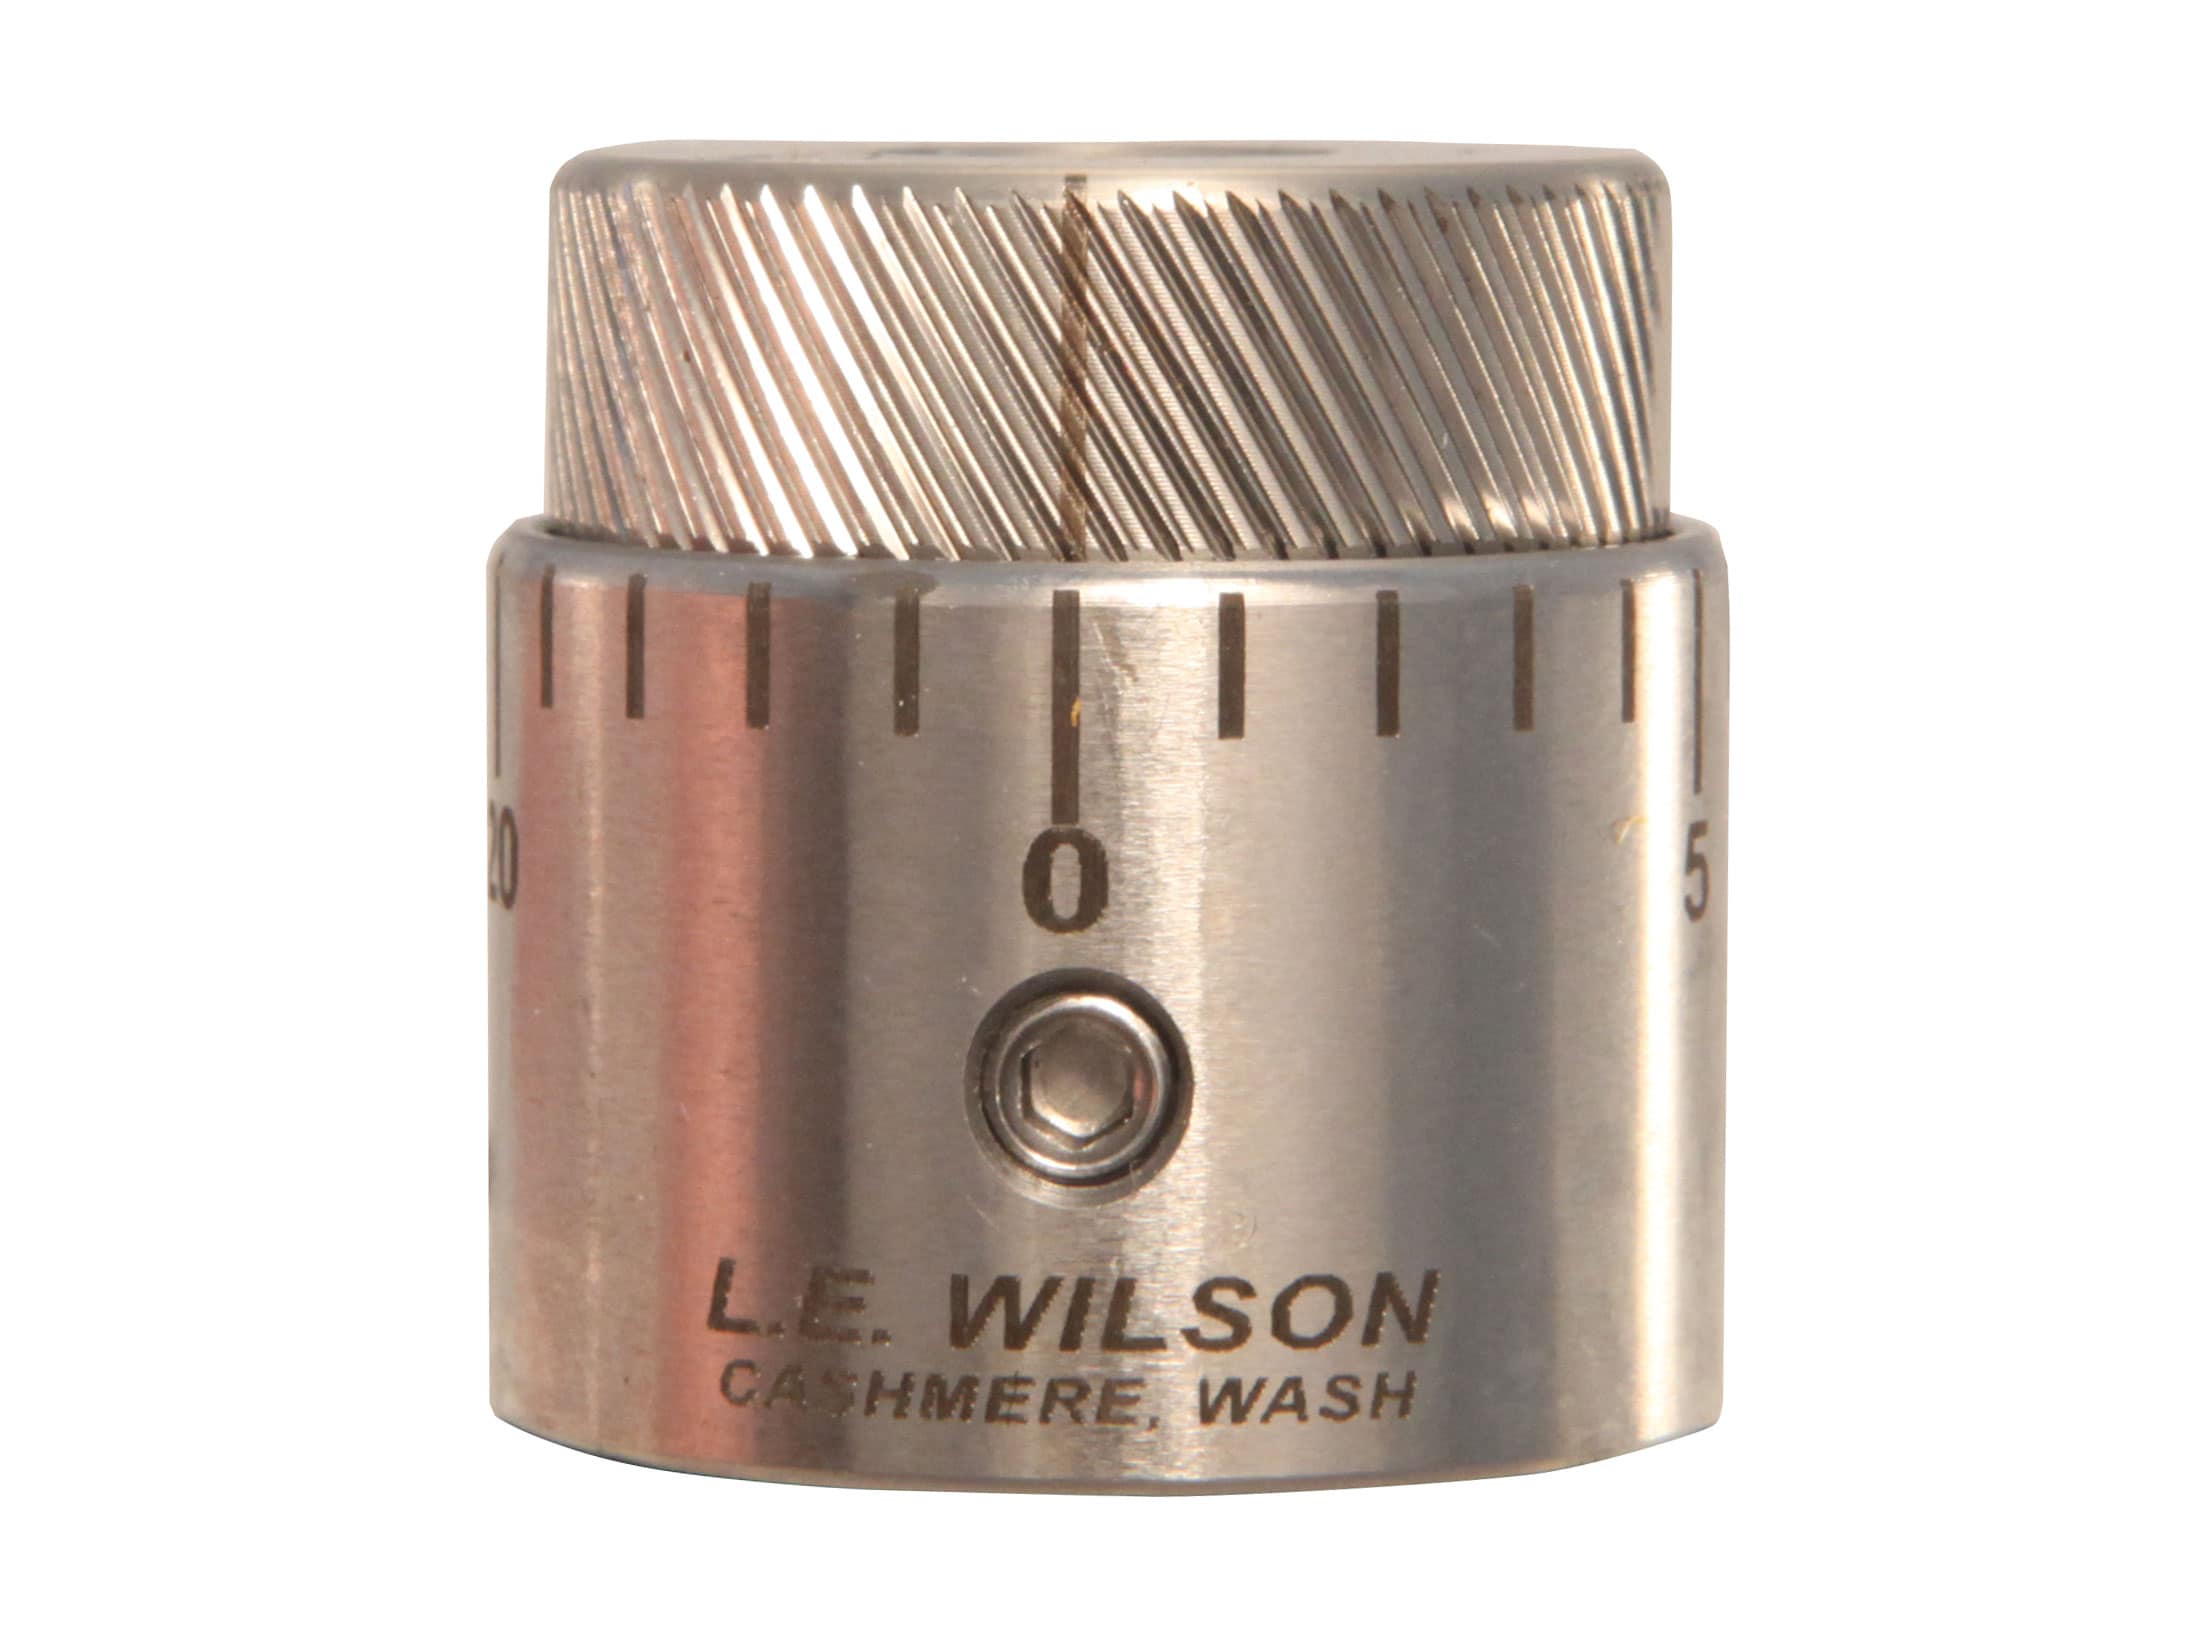 L.e 243 Winchester Ackley Improved for sale online Wilson SS Micrometer Top Bullet Seater 